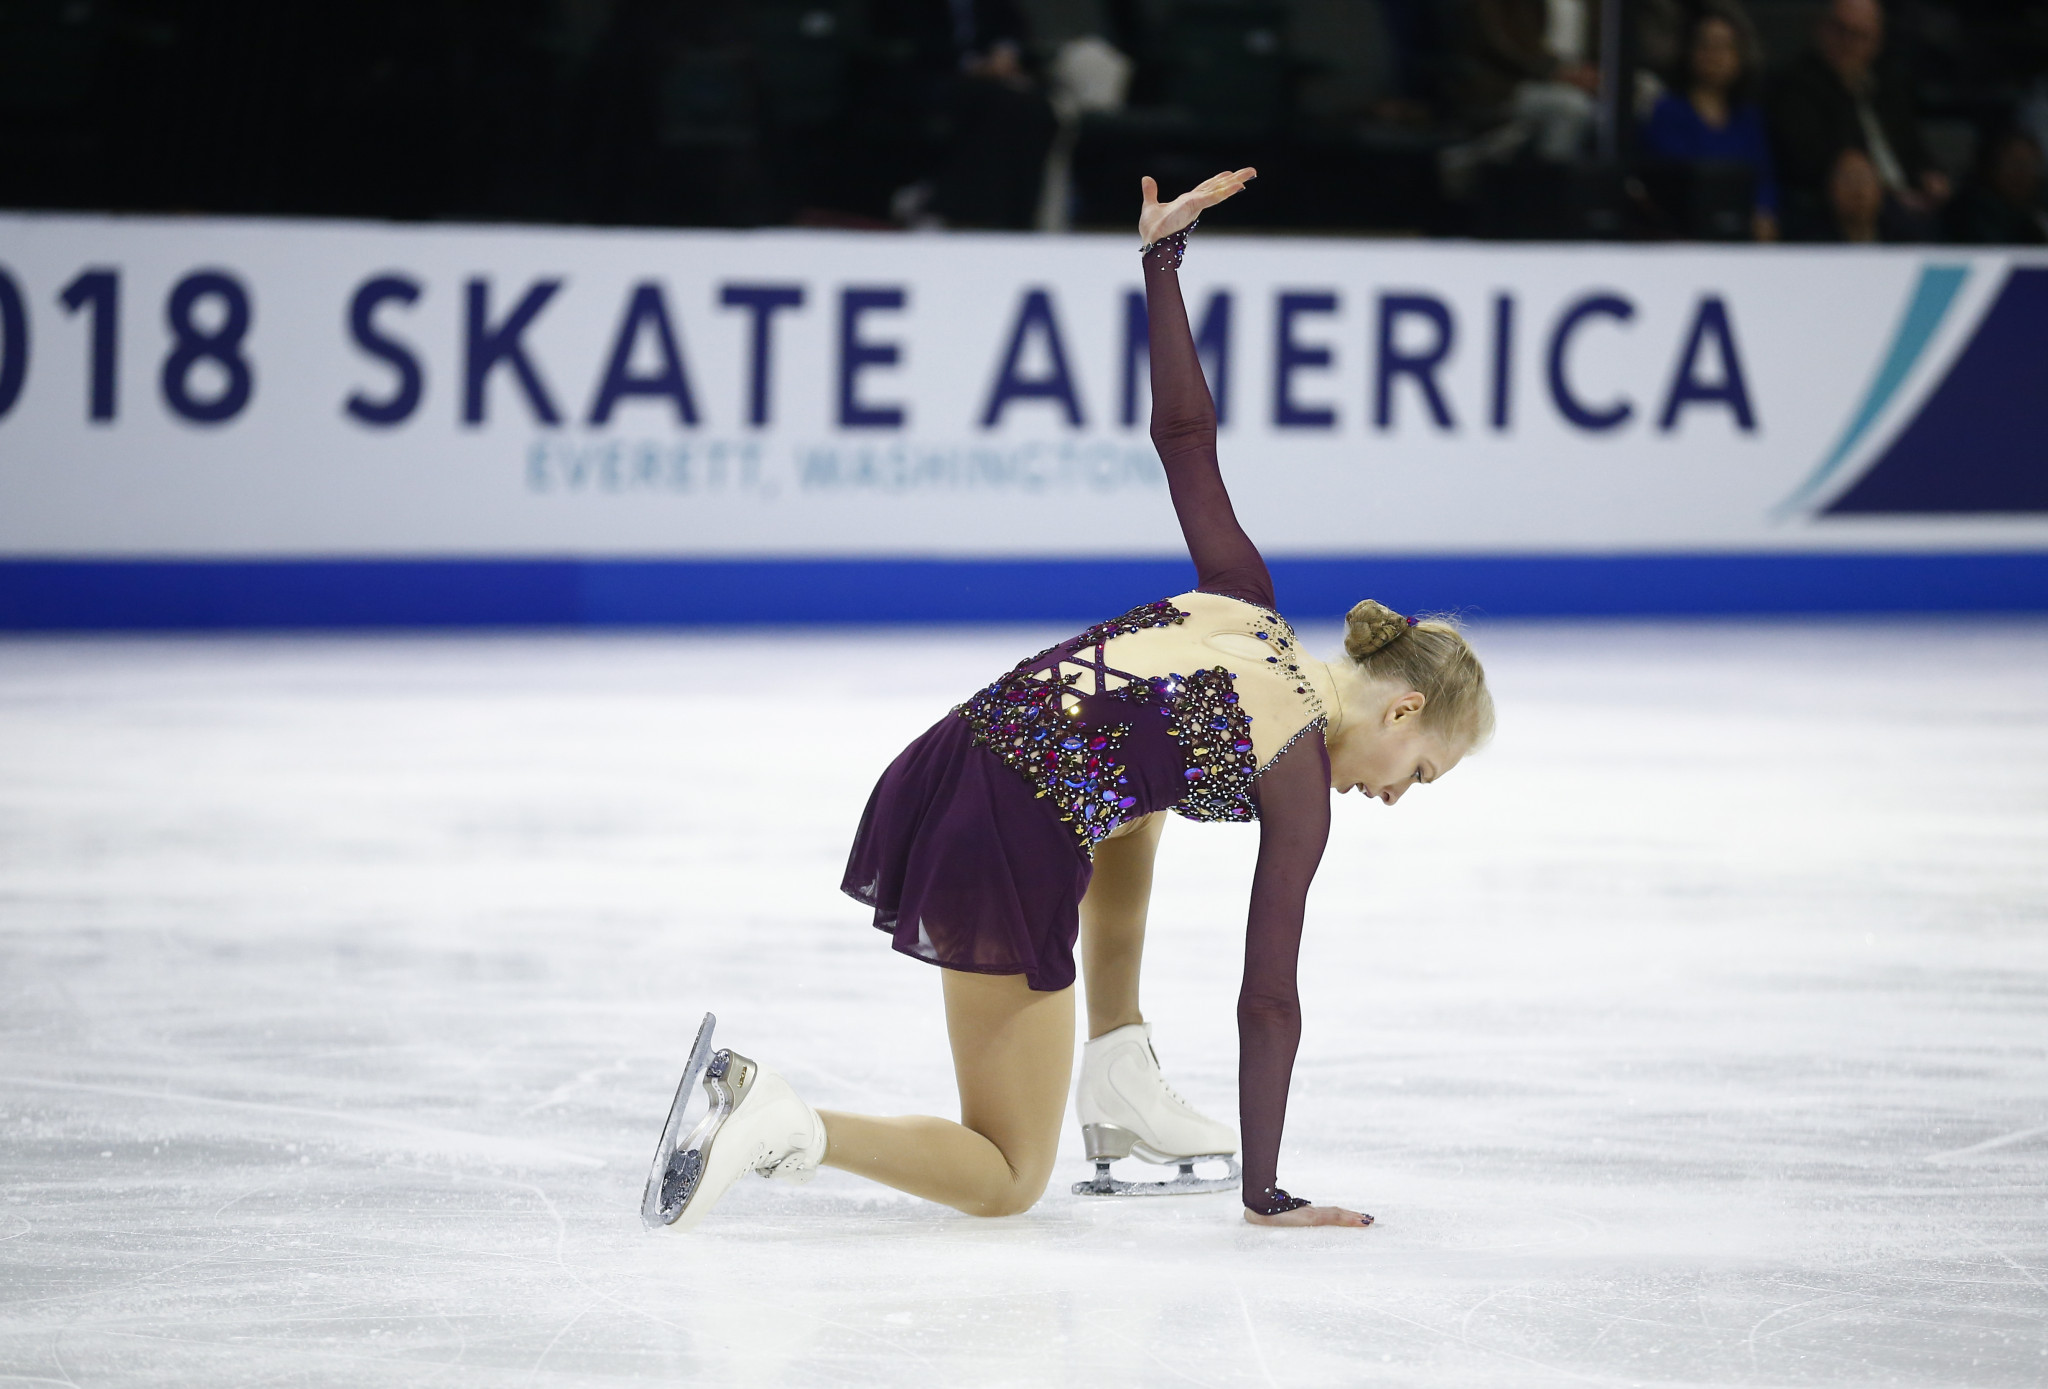 Skate America to be held in Las Vegas without spectators 